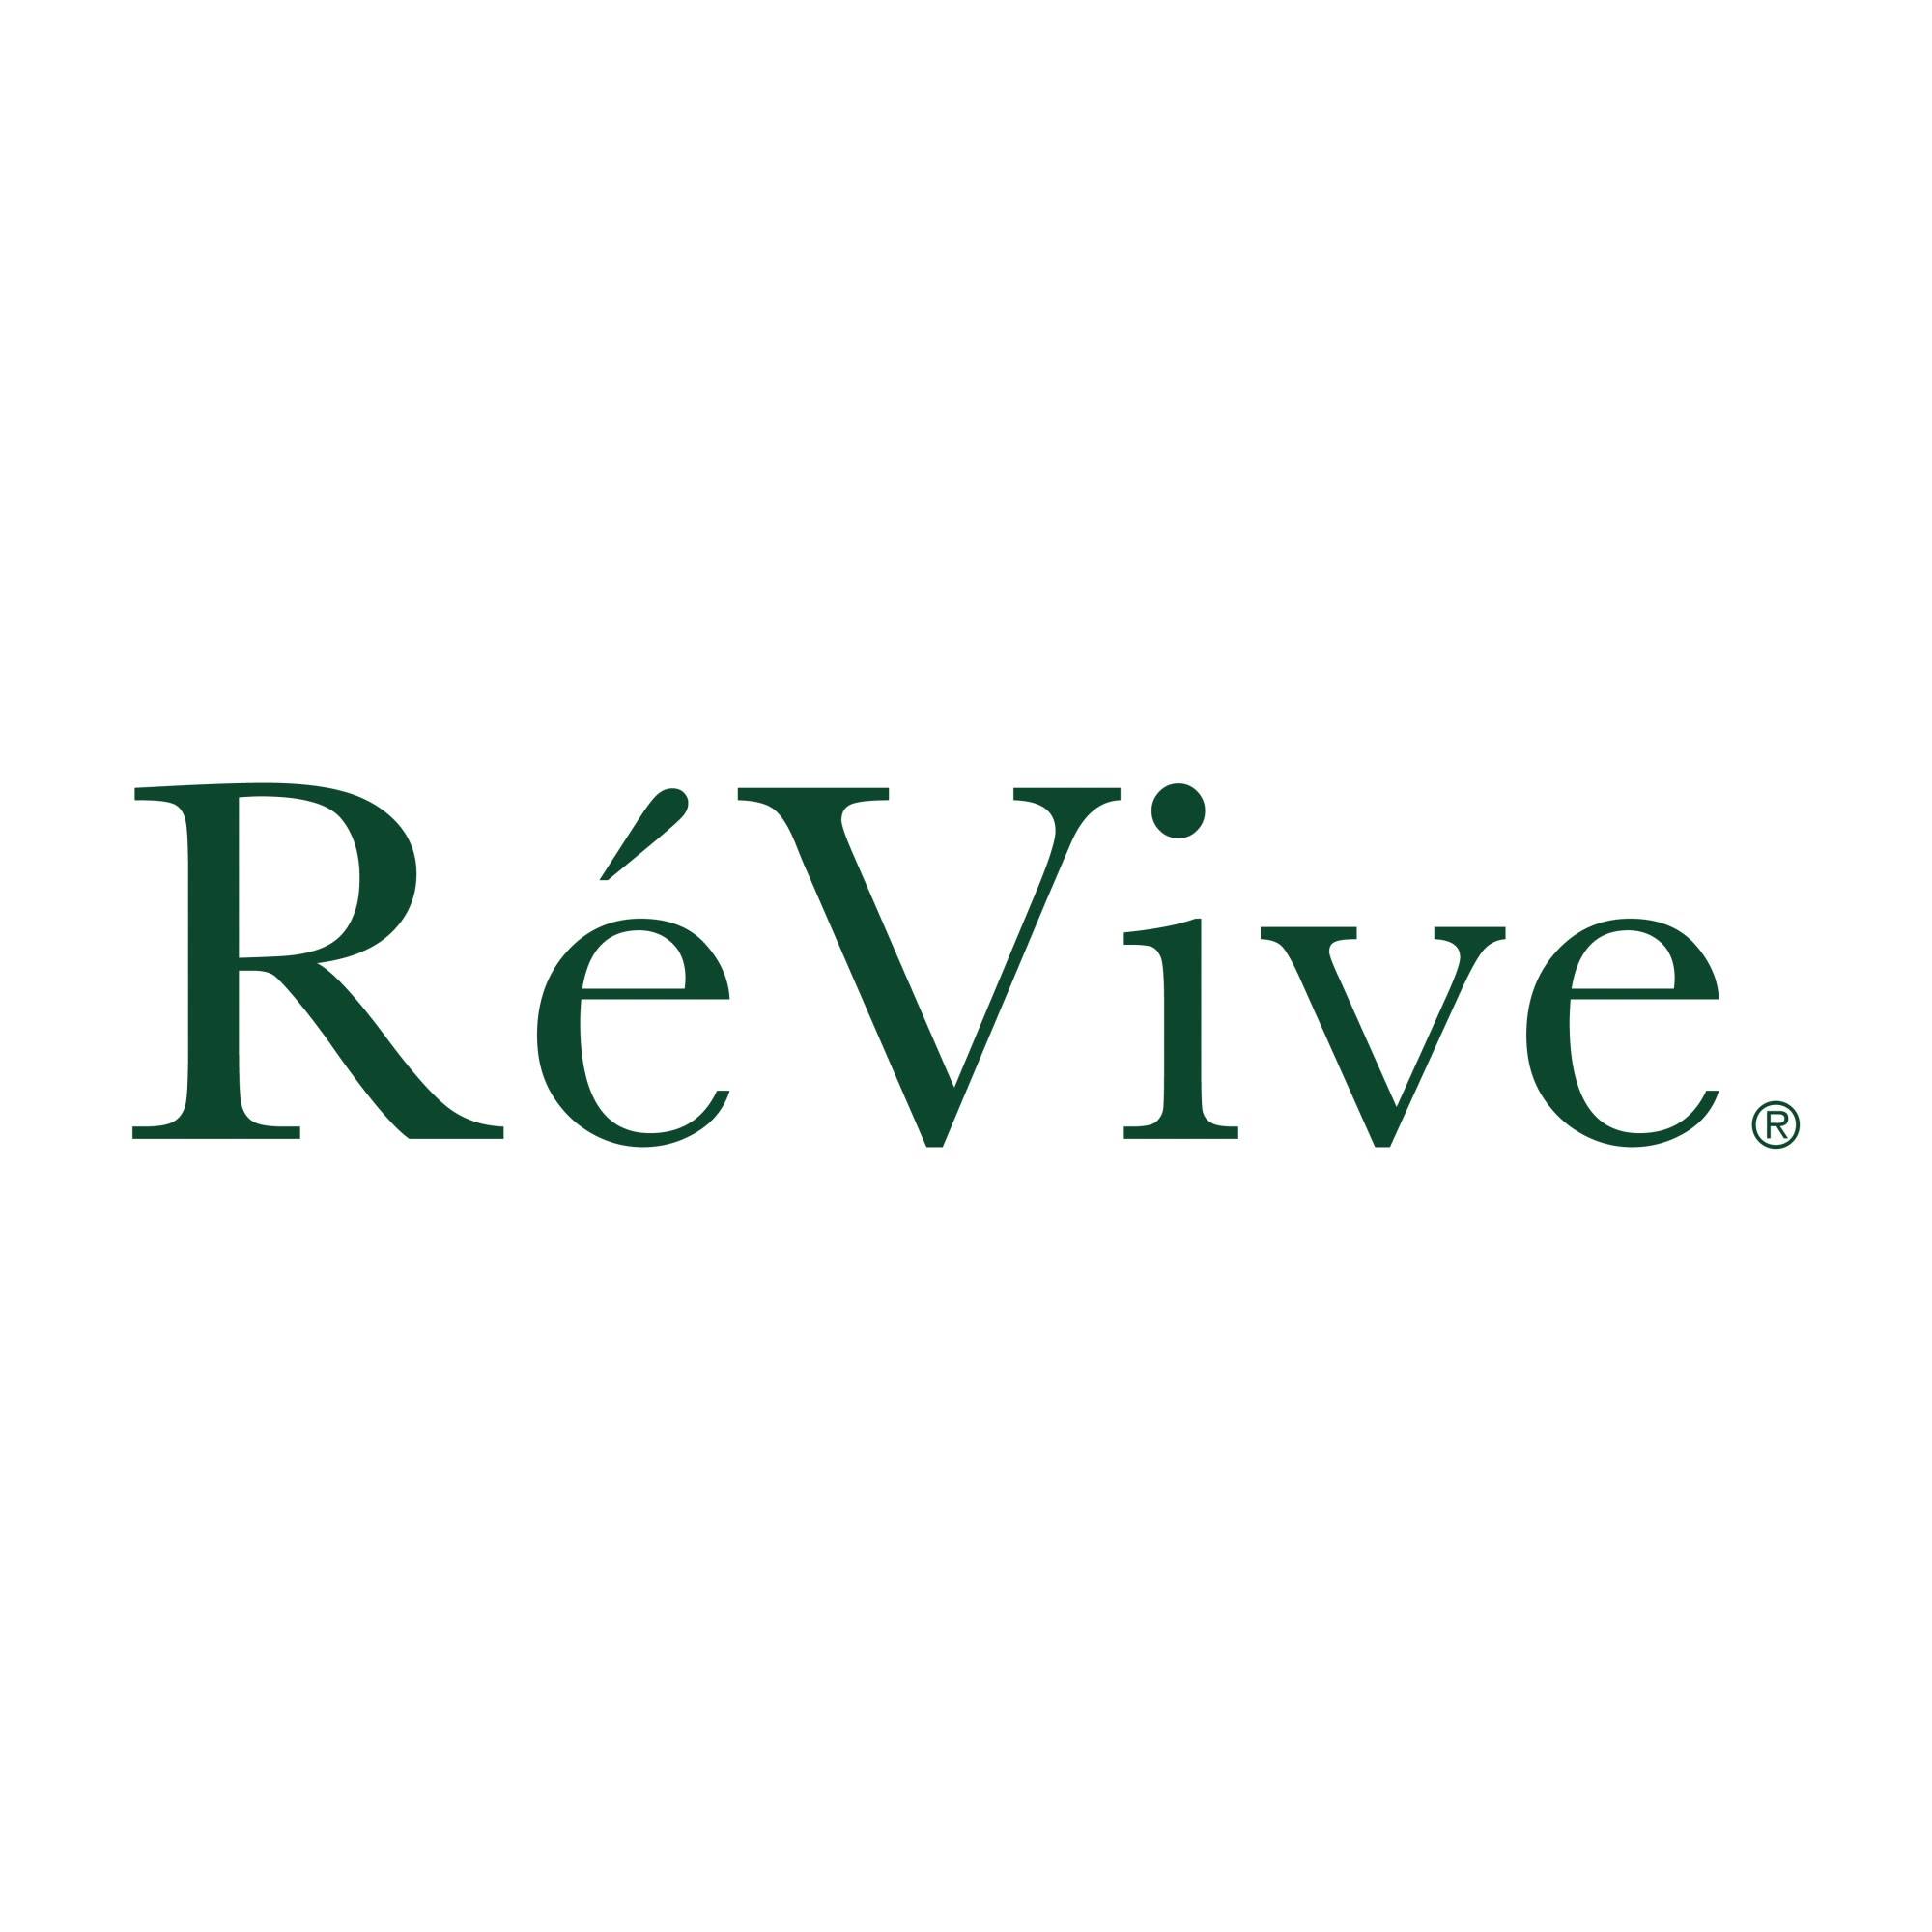 【Give your skin a second chance】 Relive your youth once again with ReVive Skincare, the luxury skincare line developed by Dr